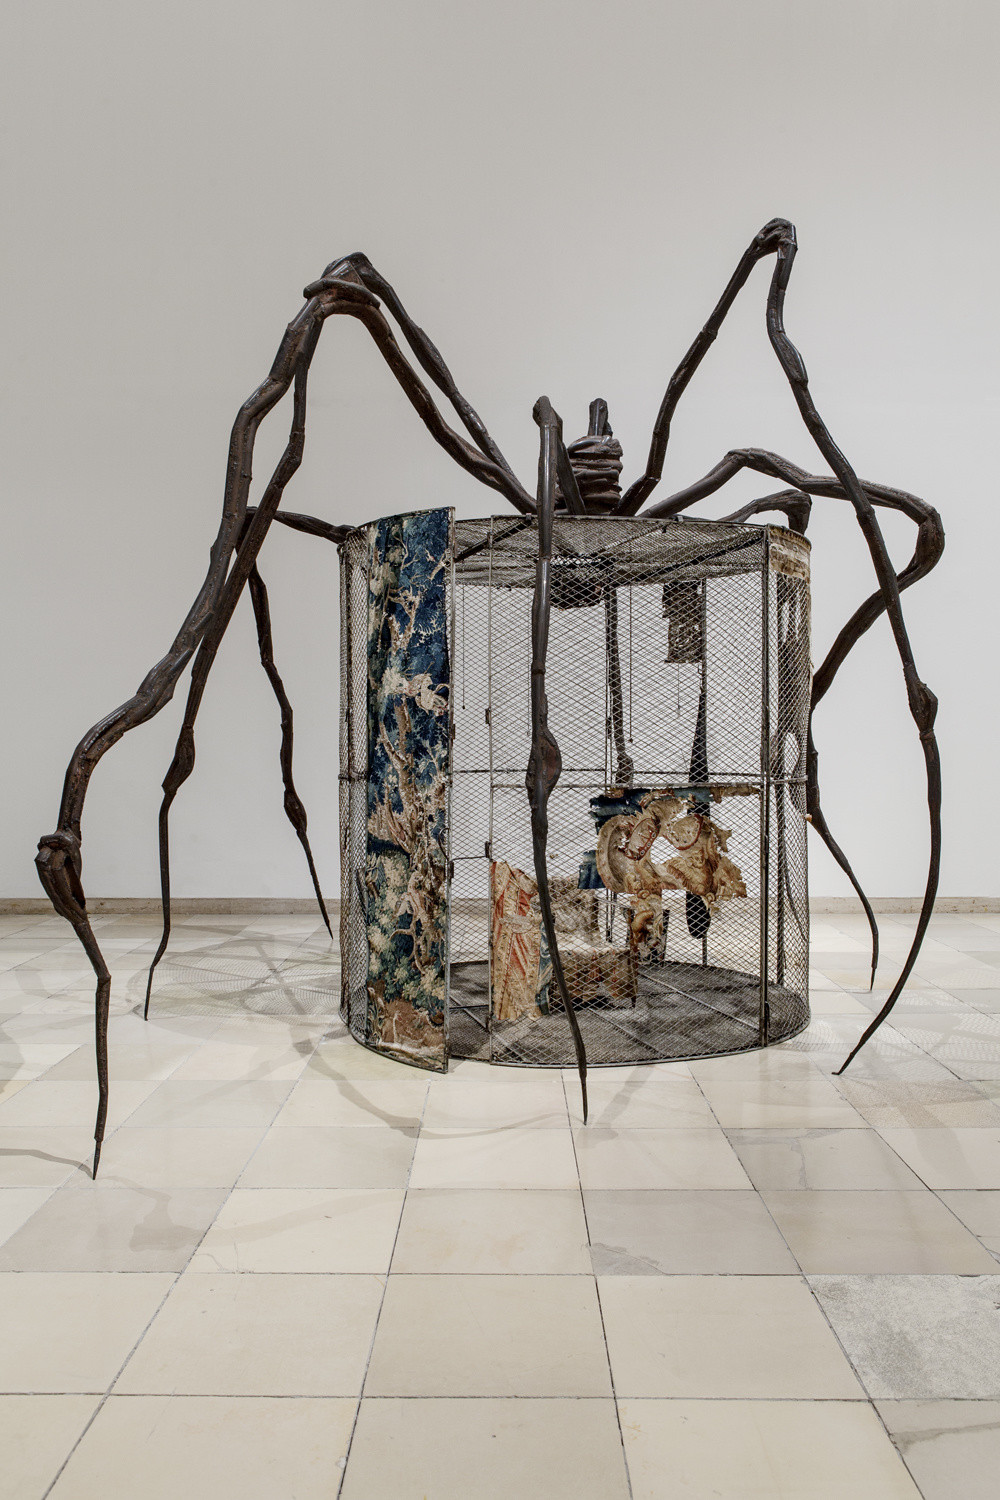 Large cylindrical cage with some tapestries on the walls, and wavy spider legs coming out of the top down to the floor.